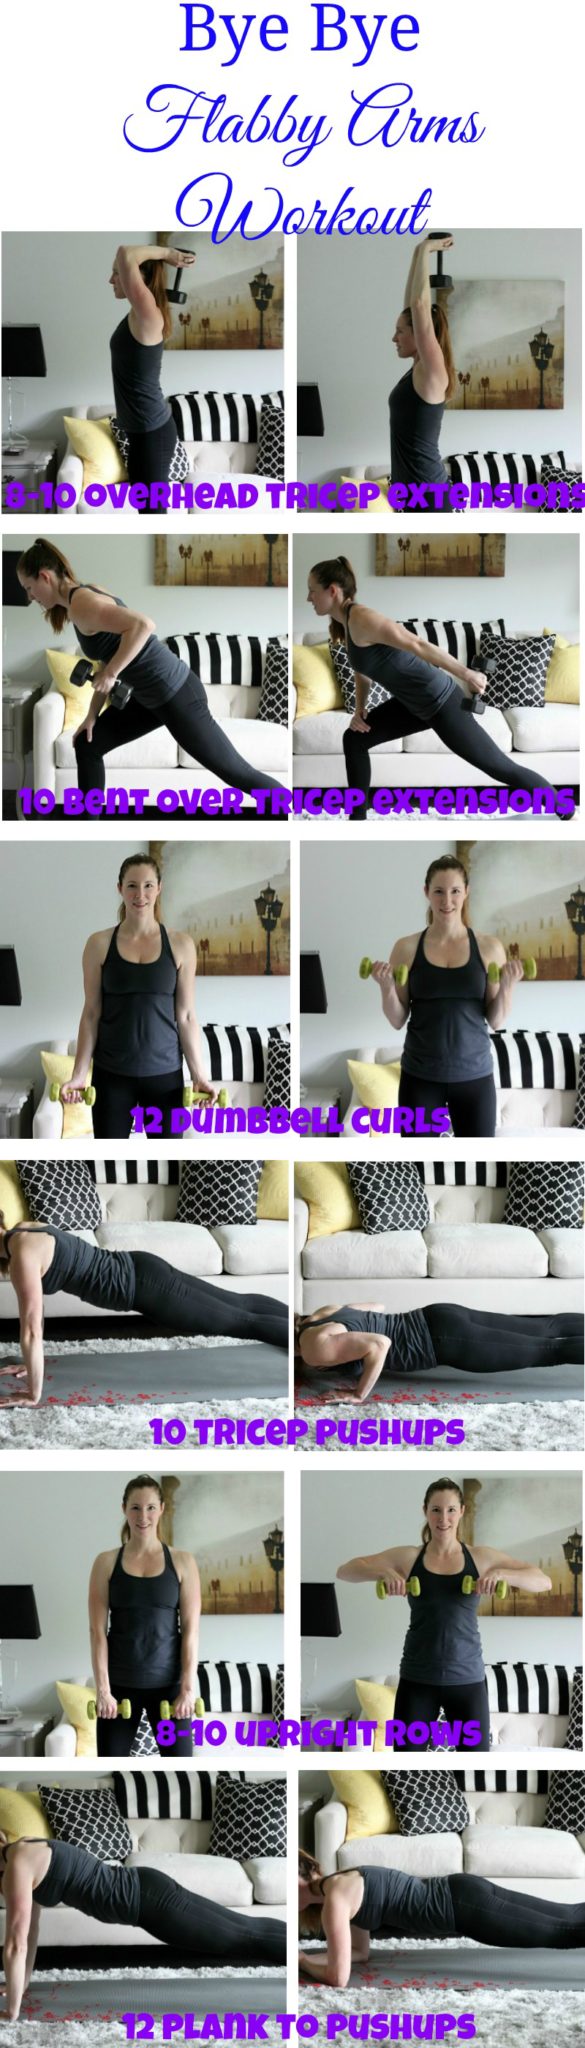 Bye Bye Flabby Arms Workout - A Fit Mom's Life